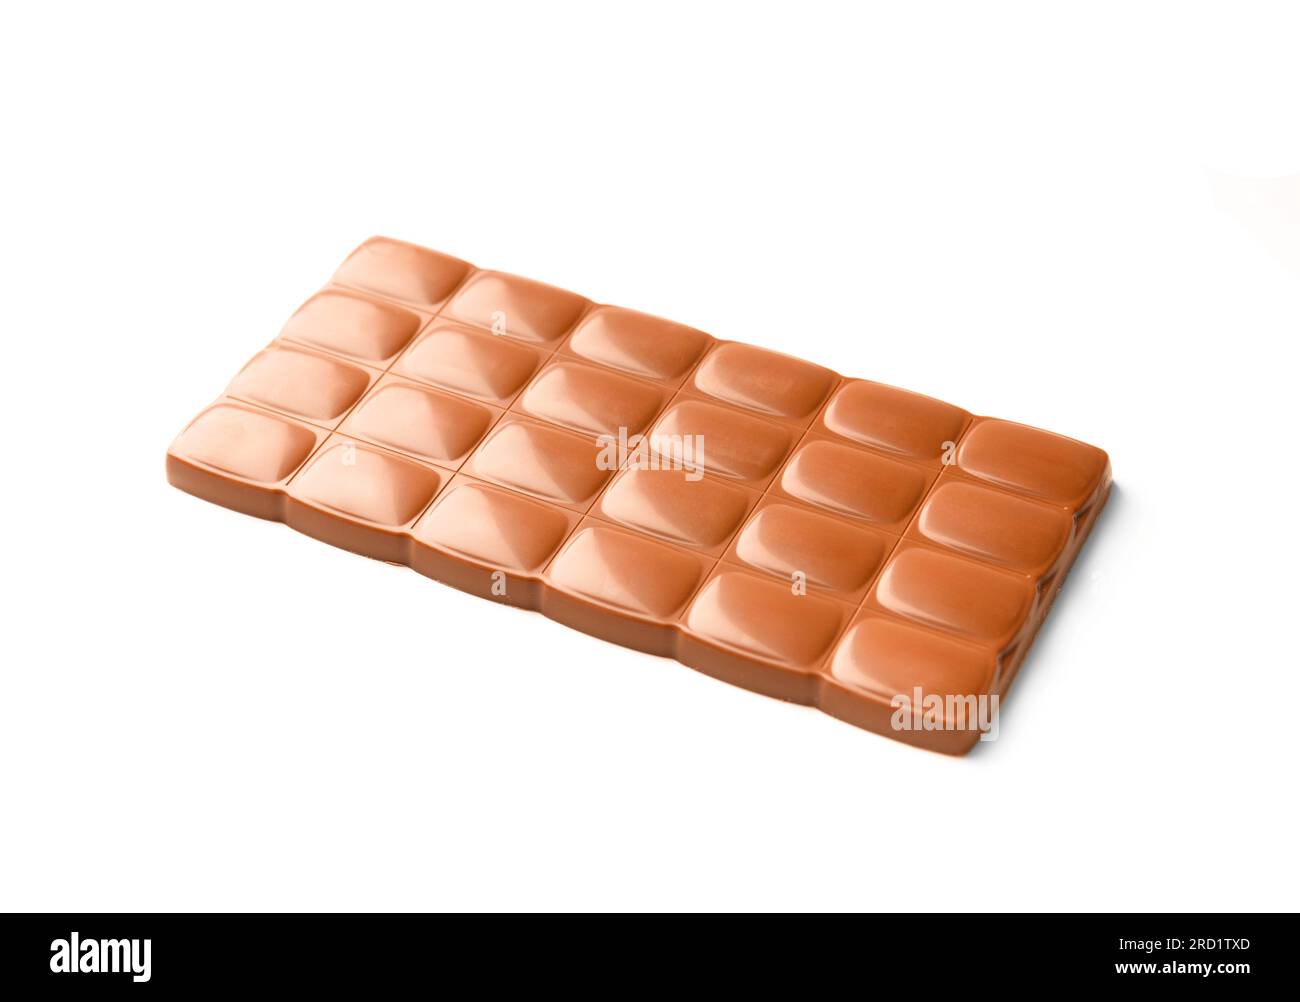 Large whole bar of milk chocolate with nuts on a white background, chocolate on white isolated. Stock Photo